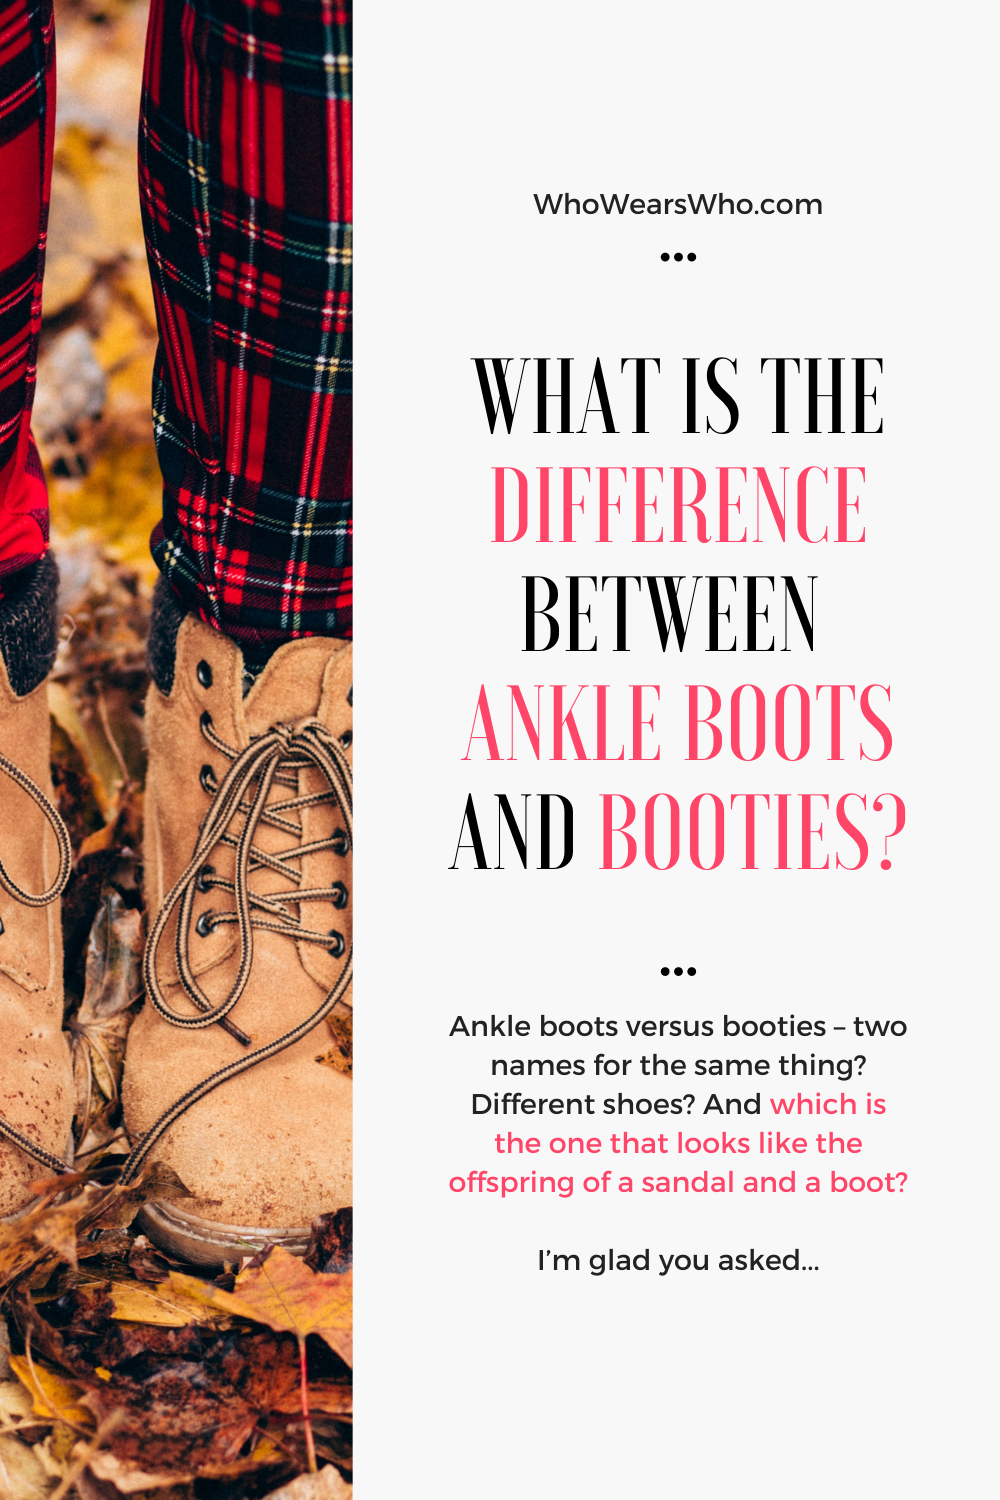 What is the difference between ankle boots and booties